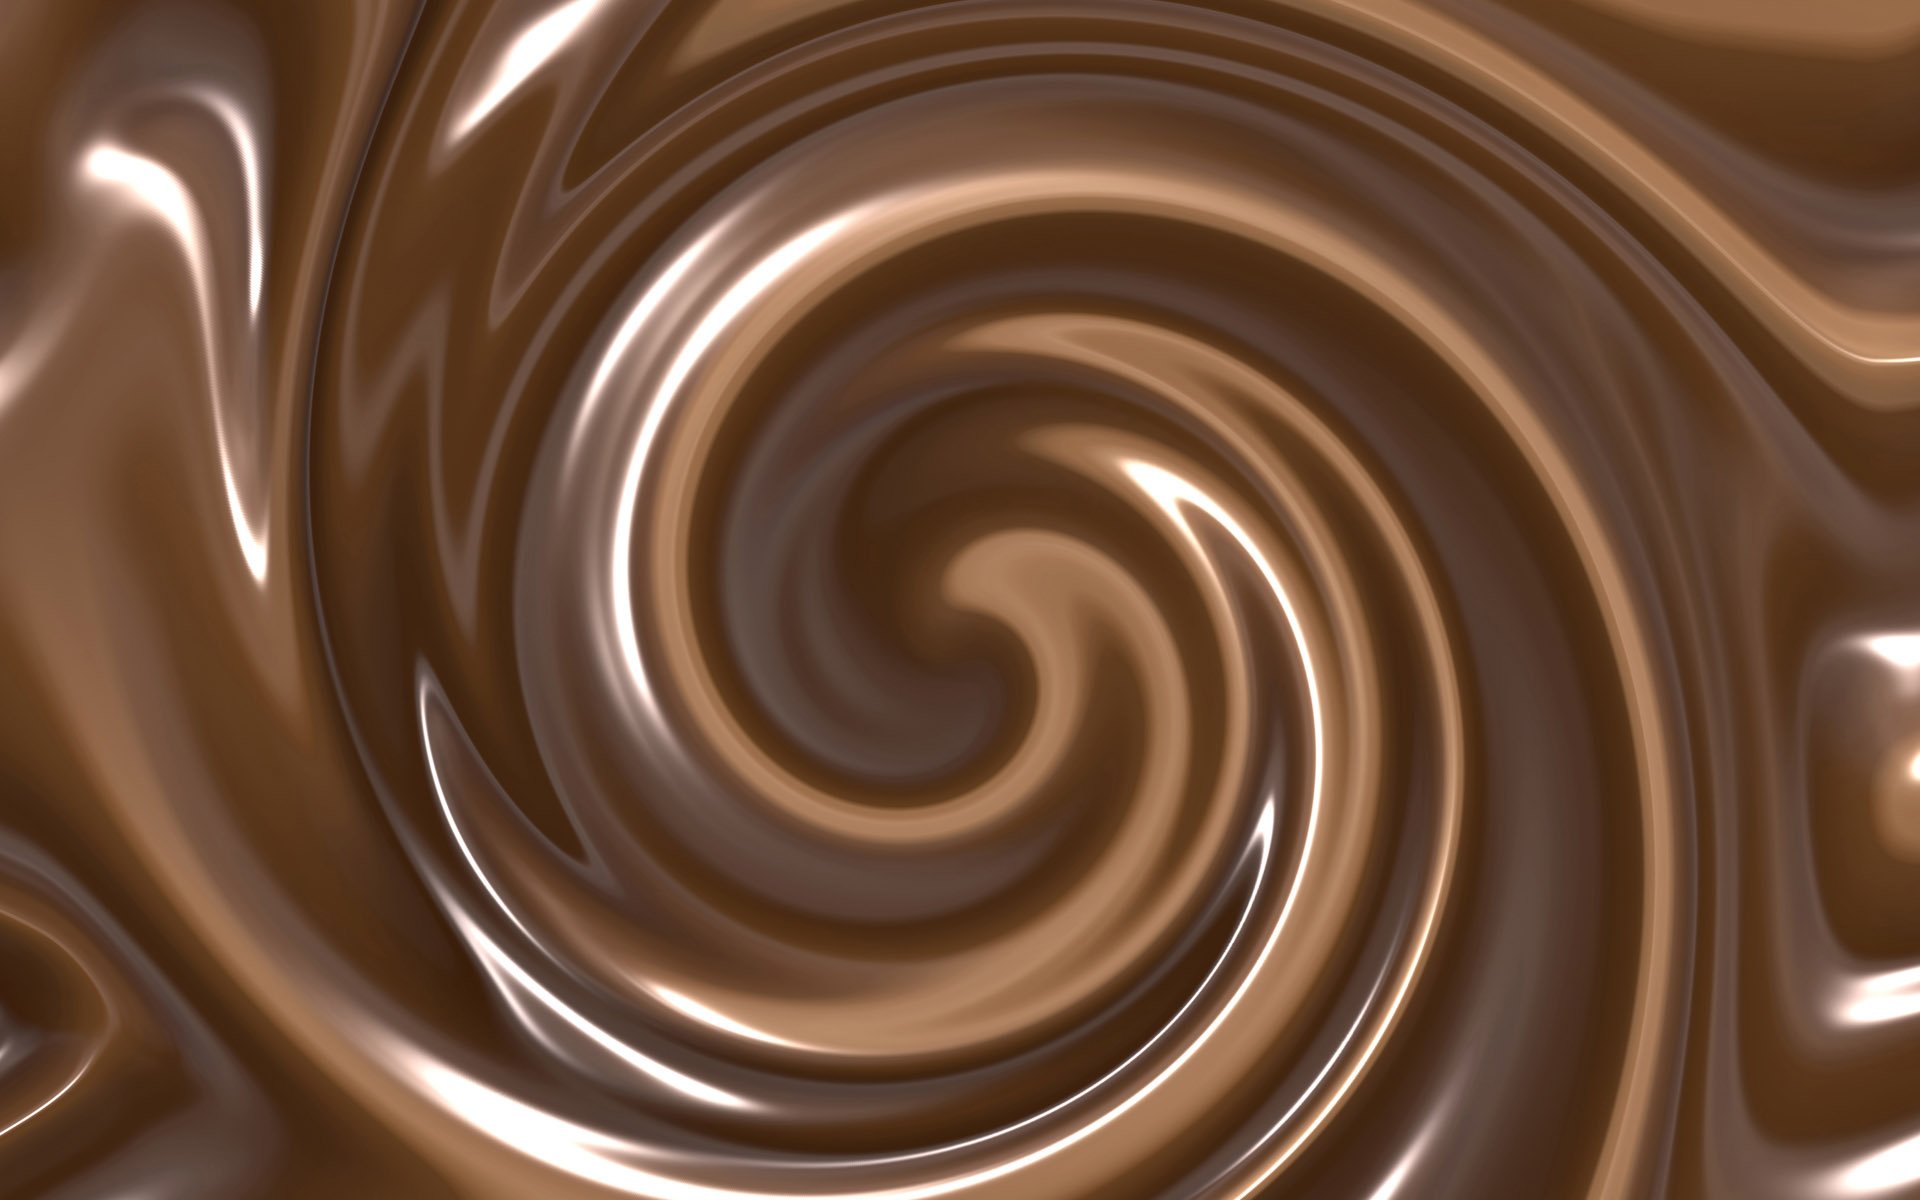 Free download wallpaper Food, Chocolate on your PC desktop